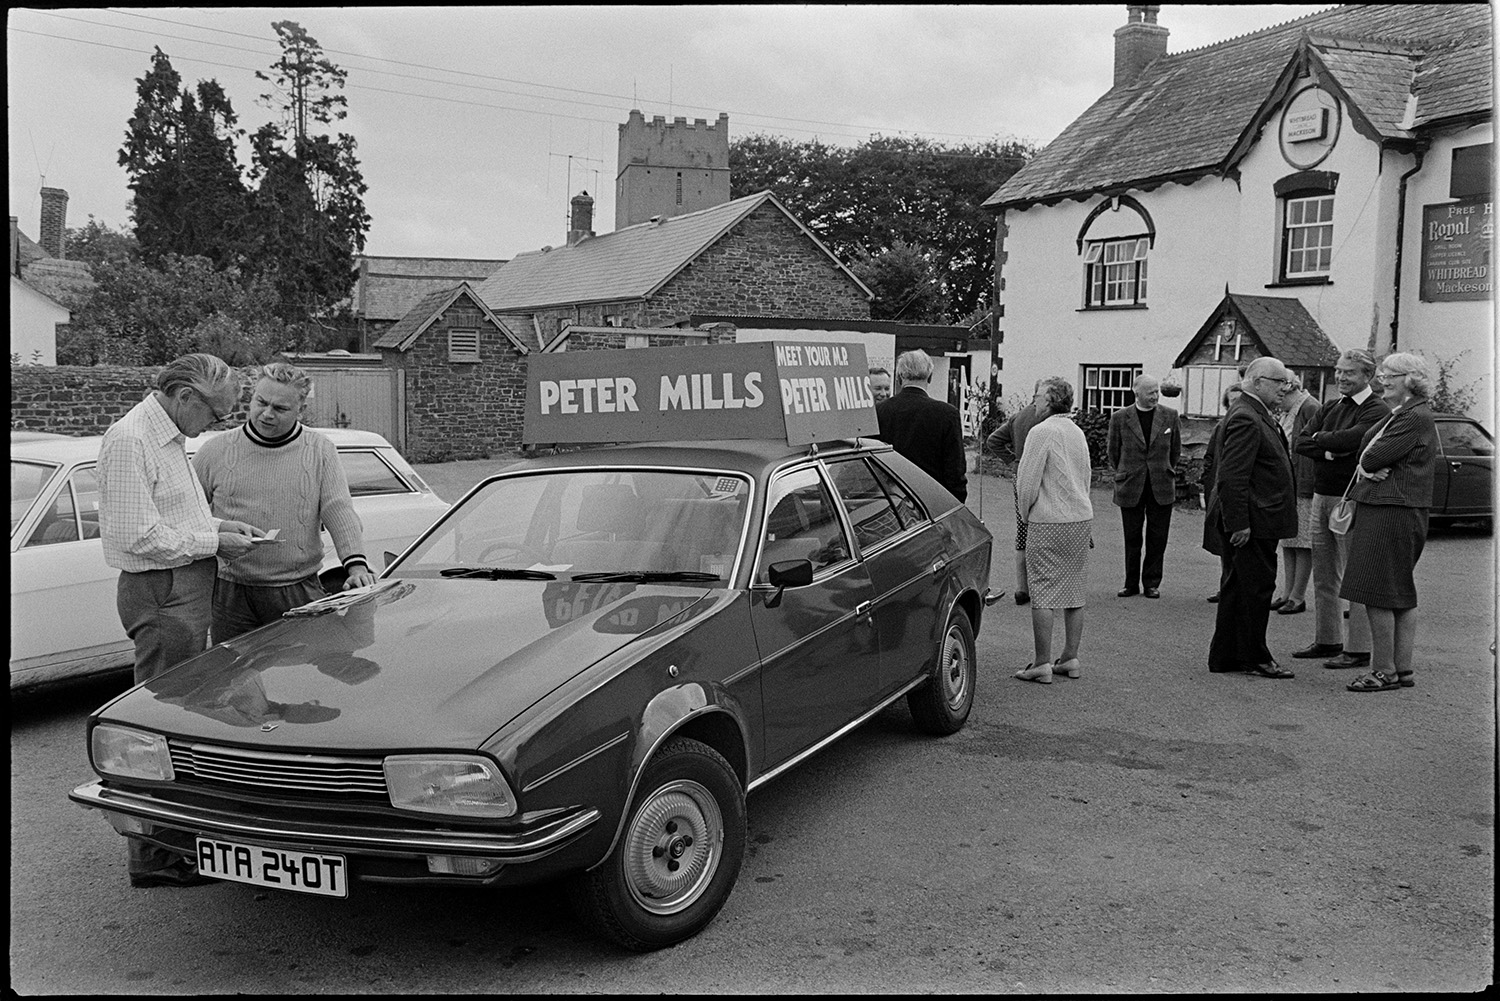 People listening to MP in village, talking to constituent beside his car with placard. 
[Men and women waiting to speak to Peter Mills, MP, outside the Royal Oak pub in Dolton. A car with a placard advertising Peter Mills in parked in the foreground and Dolton Church tower is visible in the background.]